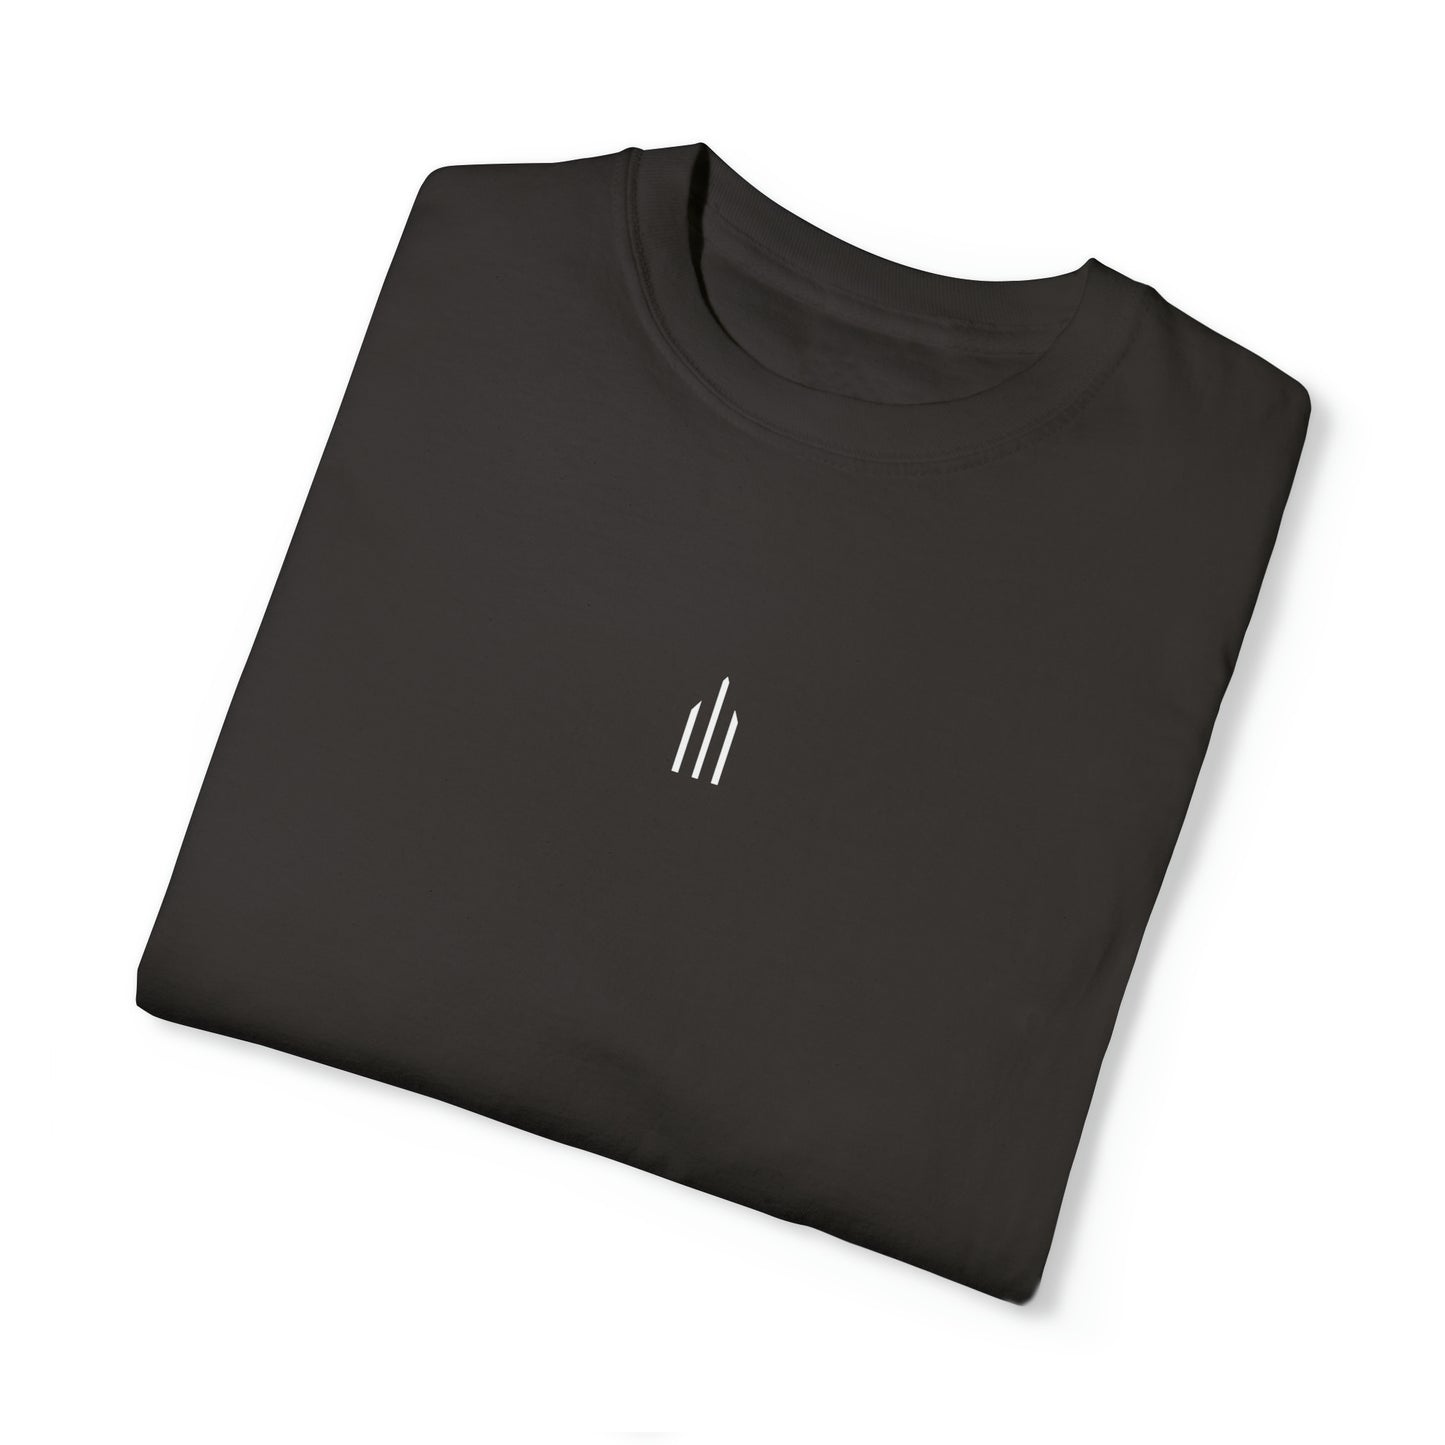 Casual Graphite T-Shirt w/ Logo, Text, And Tally Graphics